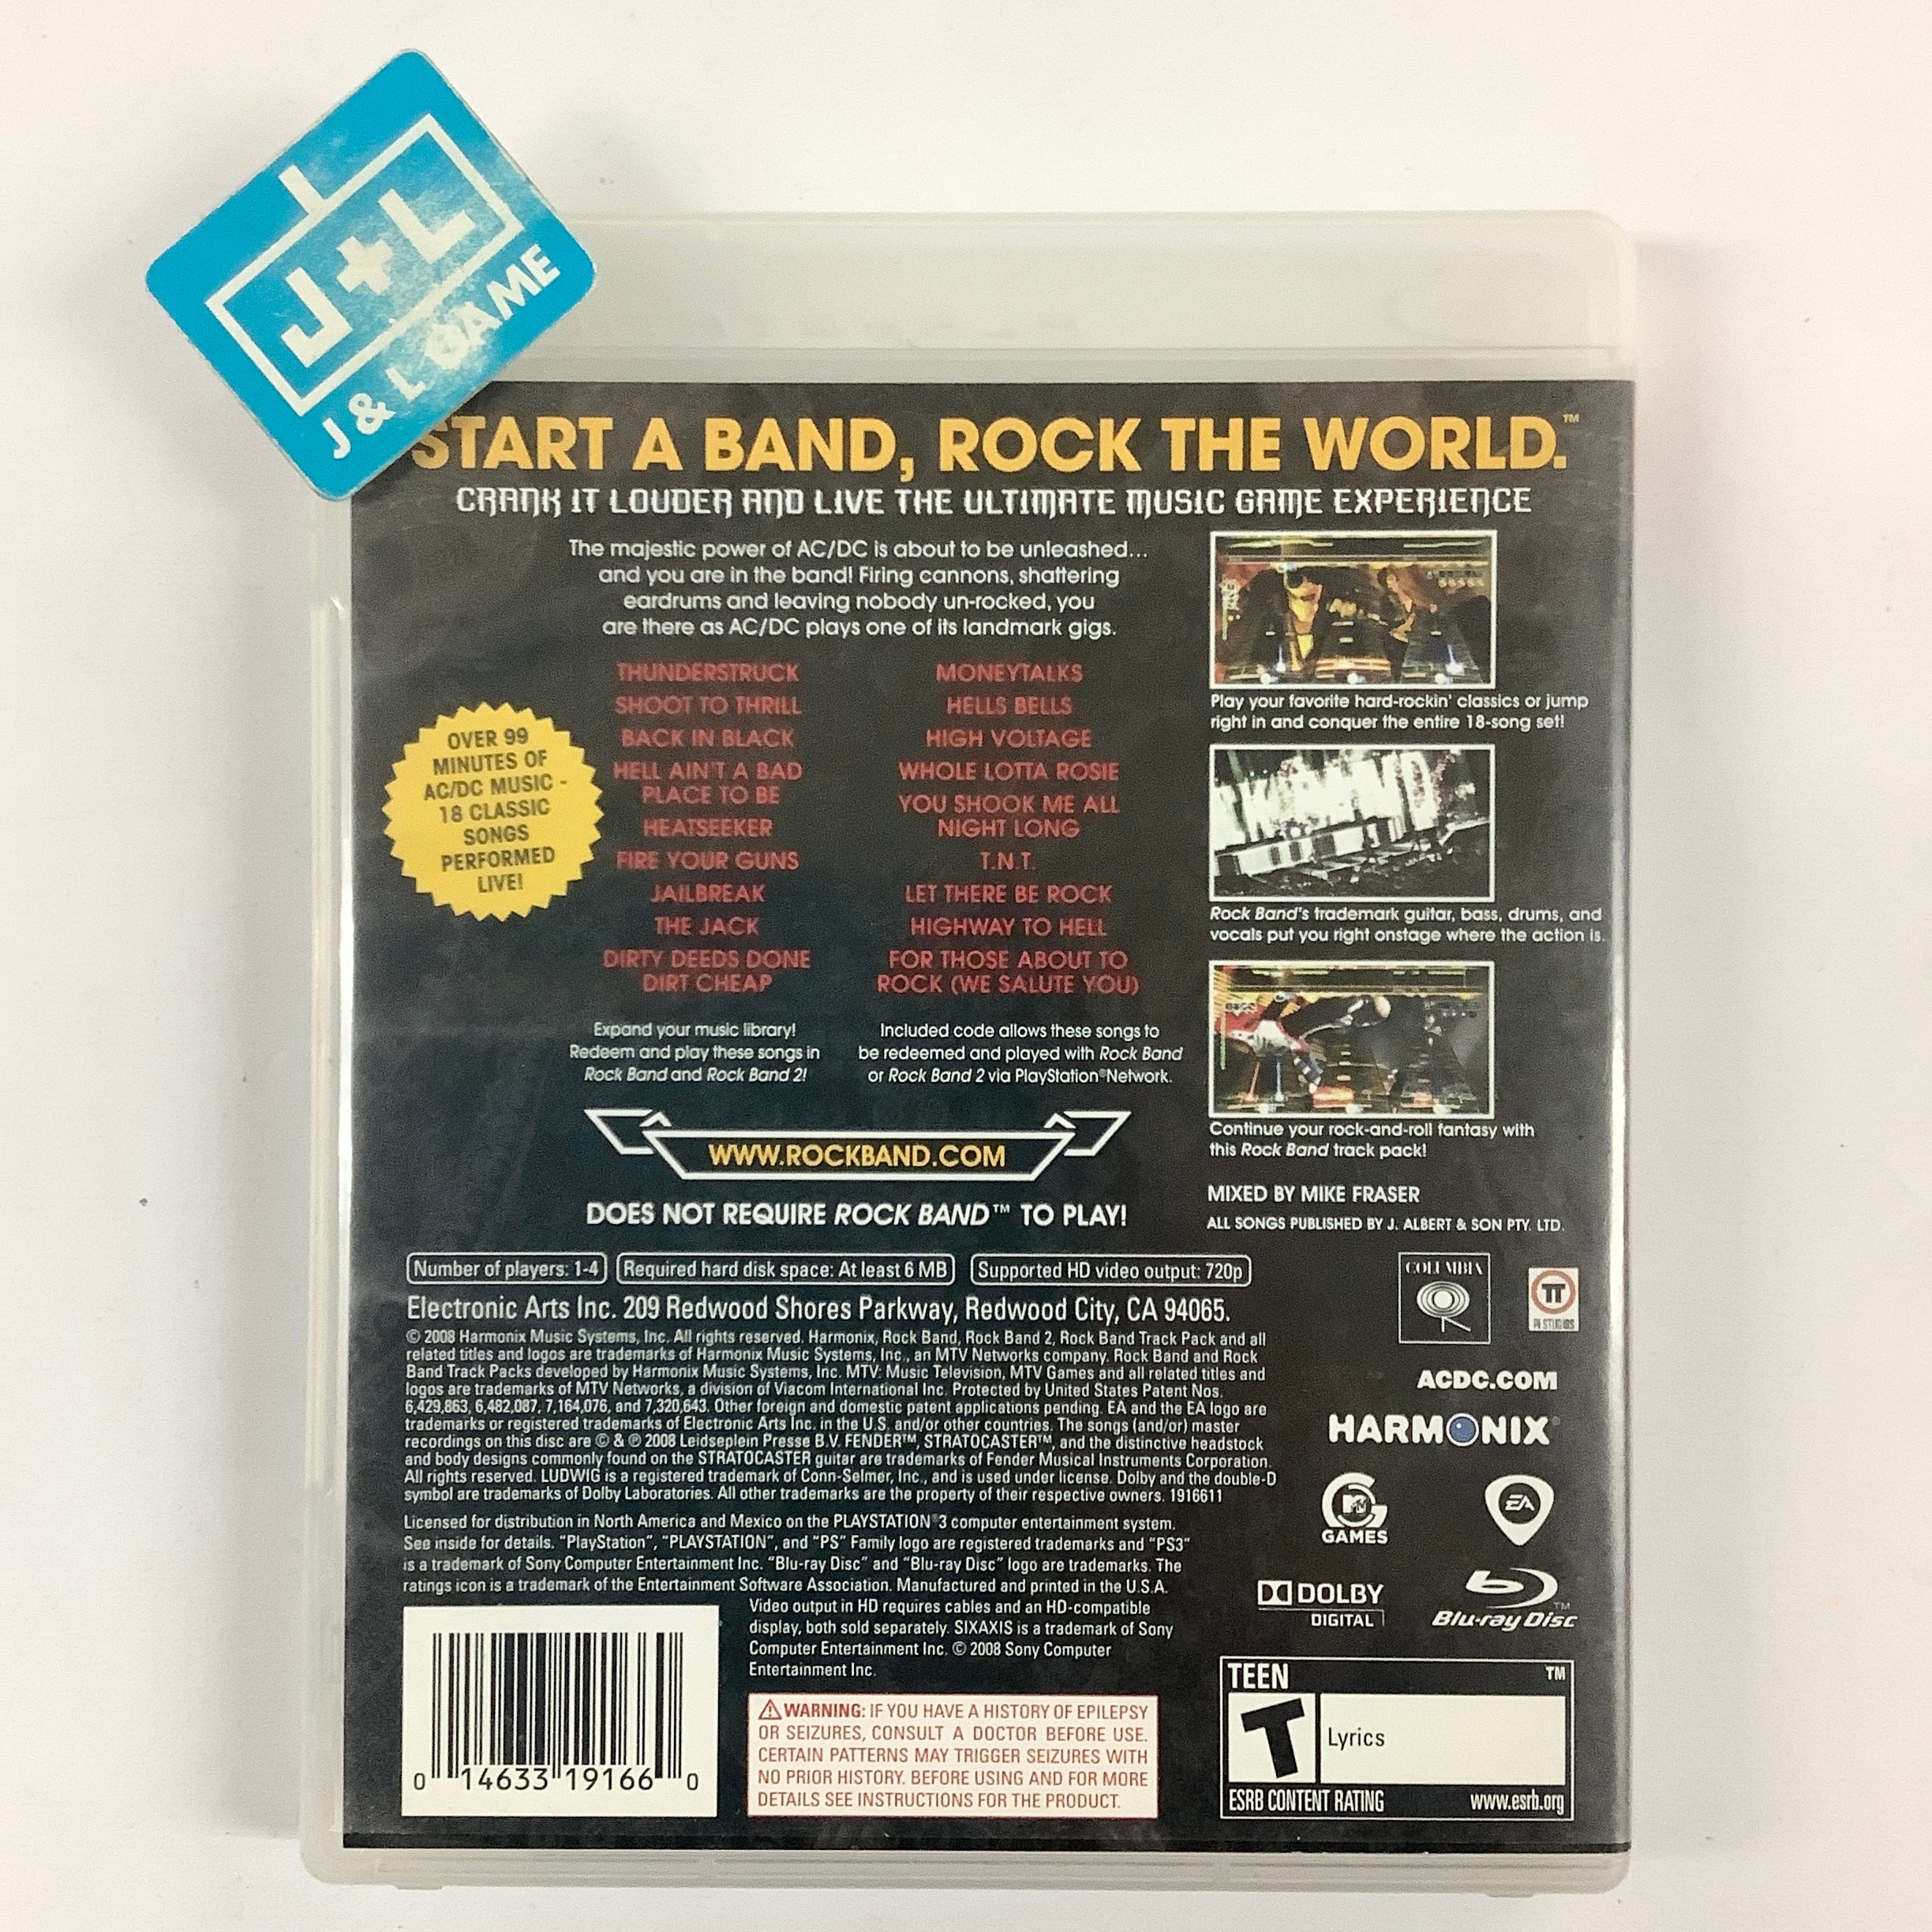 Rock Band Track Pack: AC/DC Live - (PS3) PlayStation 3 [Pre-Owned] Video Games MTV Games   